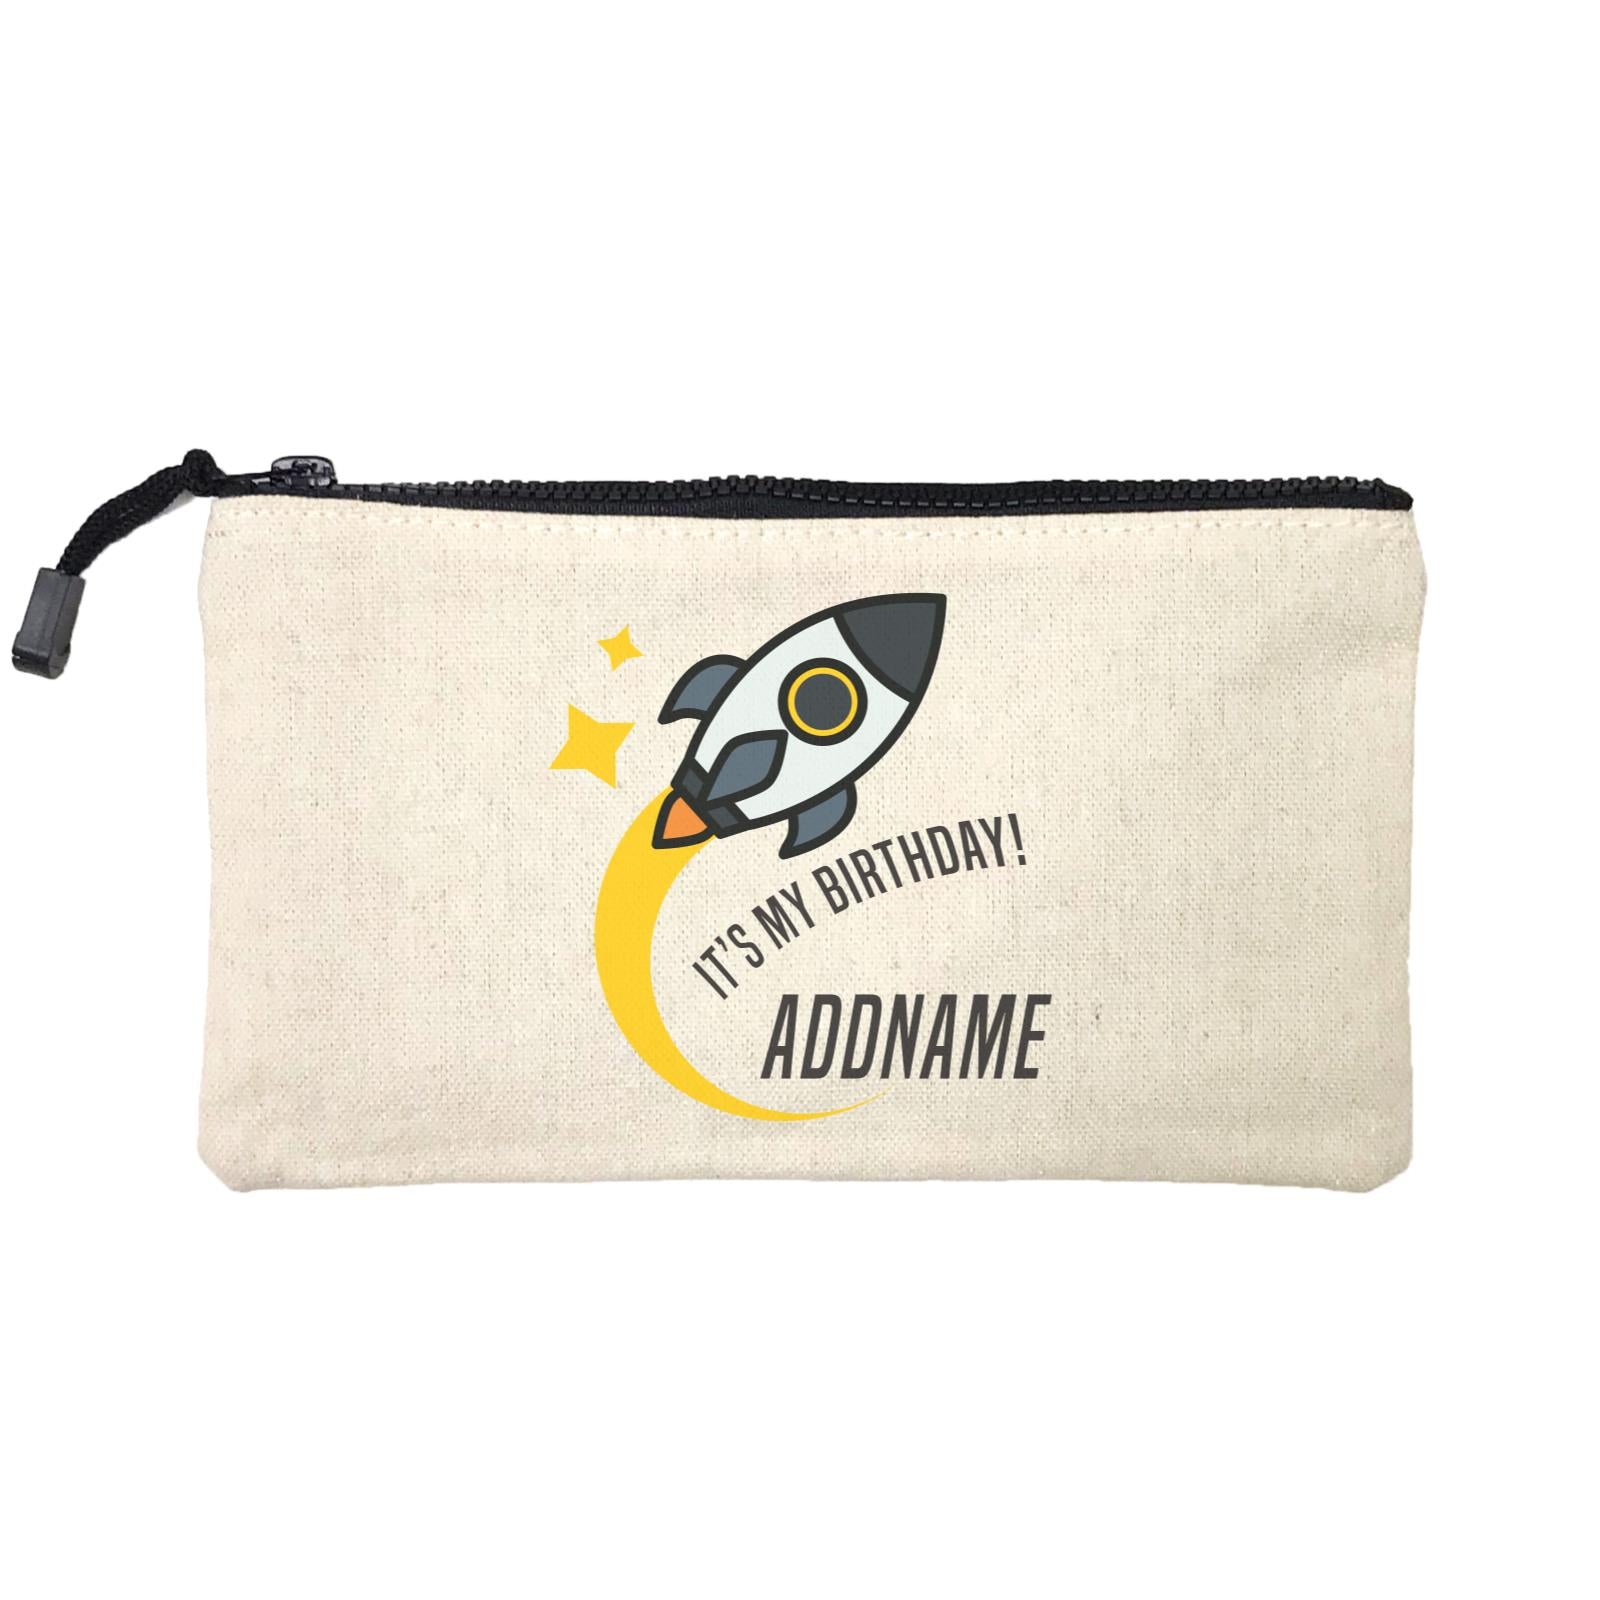 Birthday Flying Rocket To Galaxy It's My Birthday Addname Mini Accessories Stationery Pouch